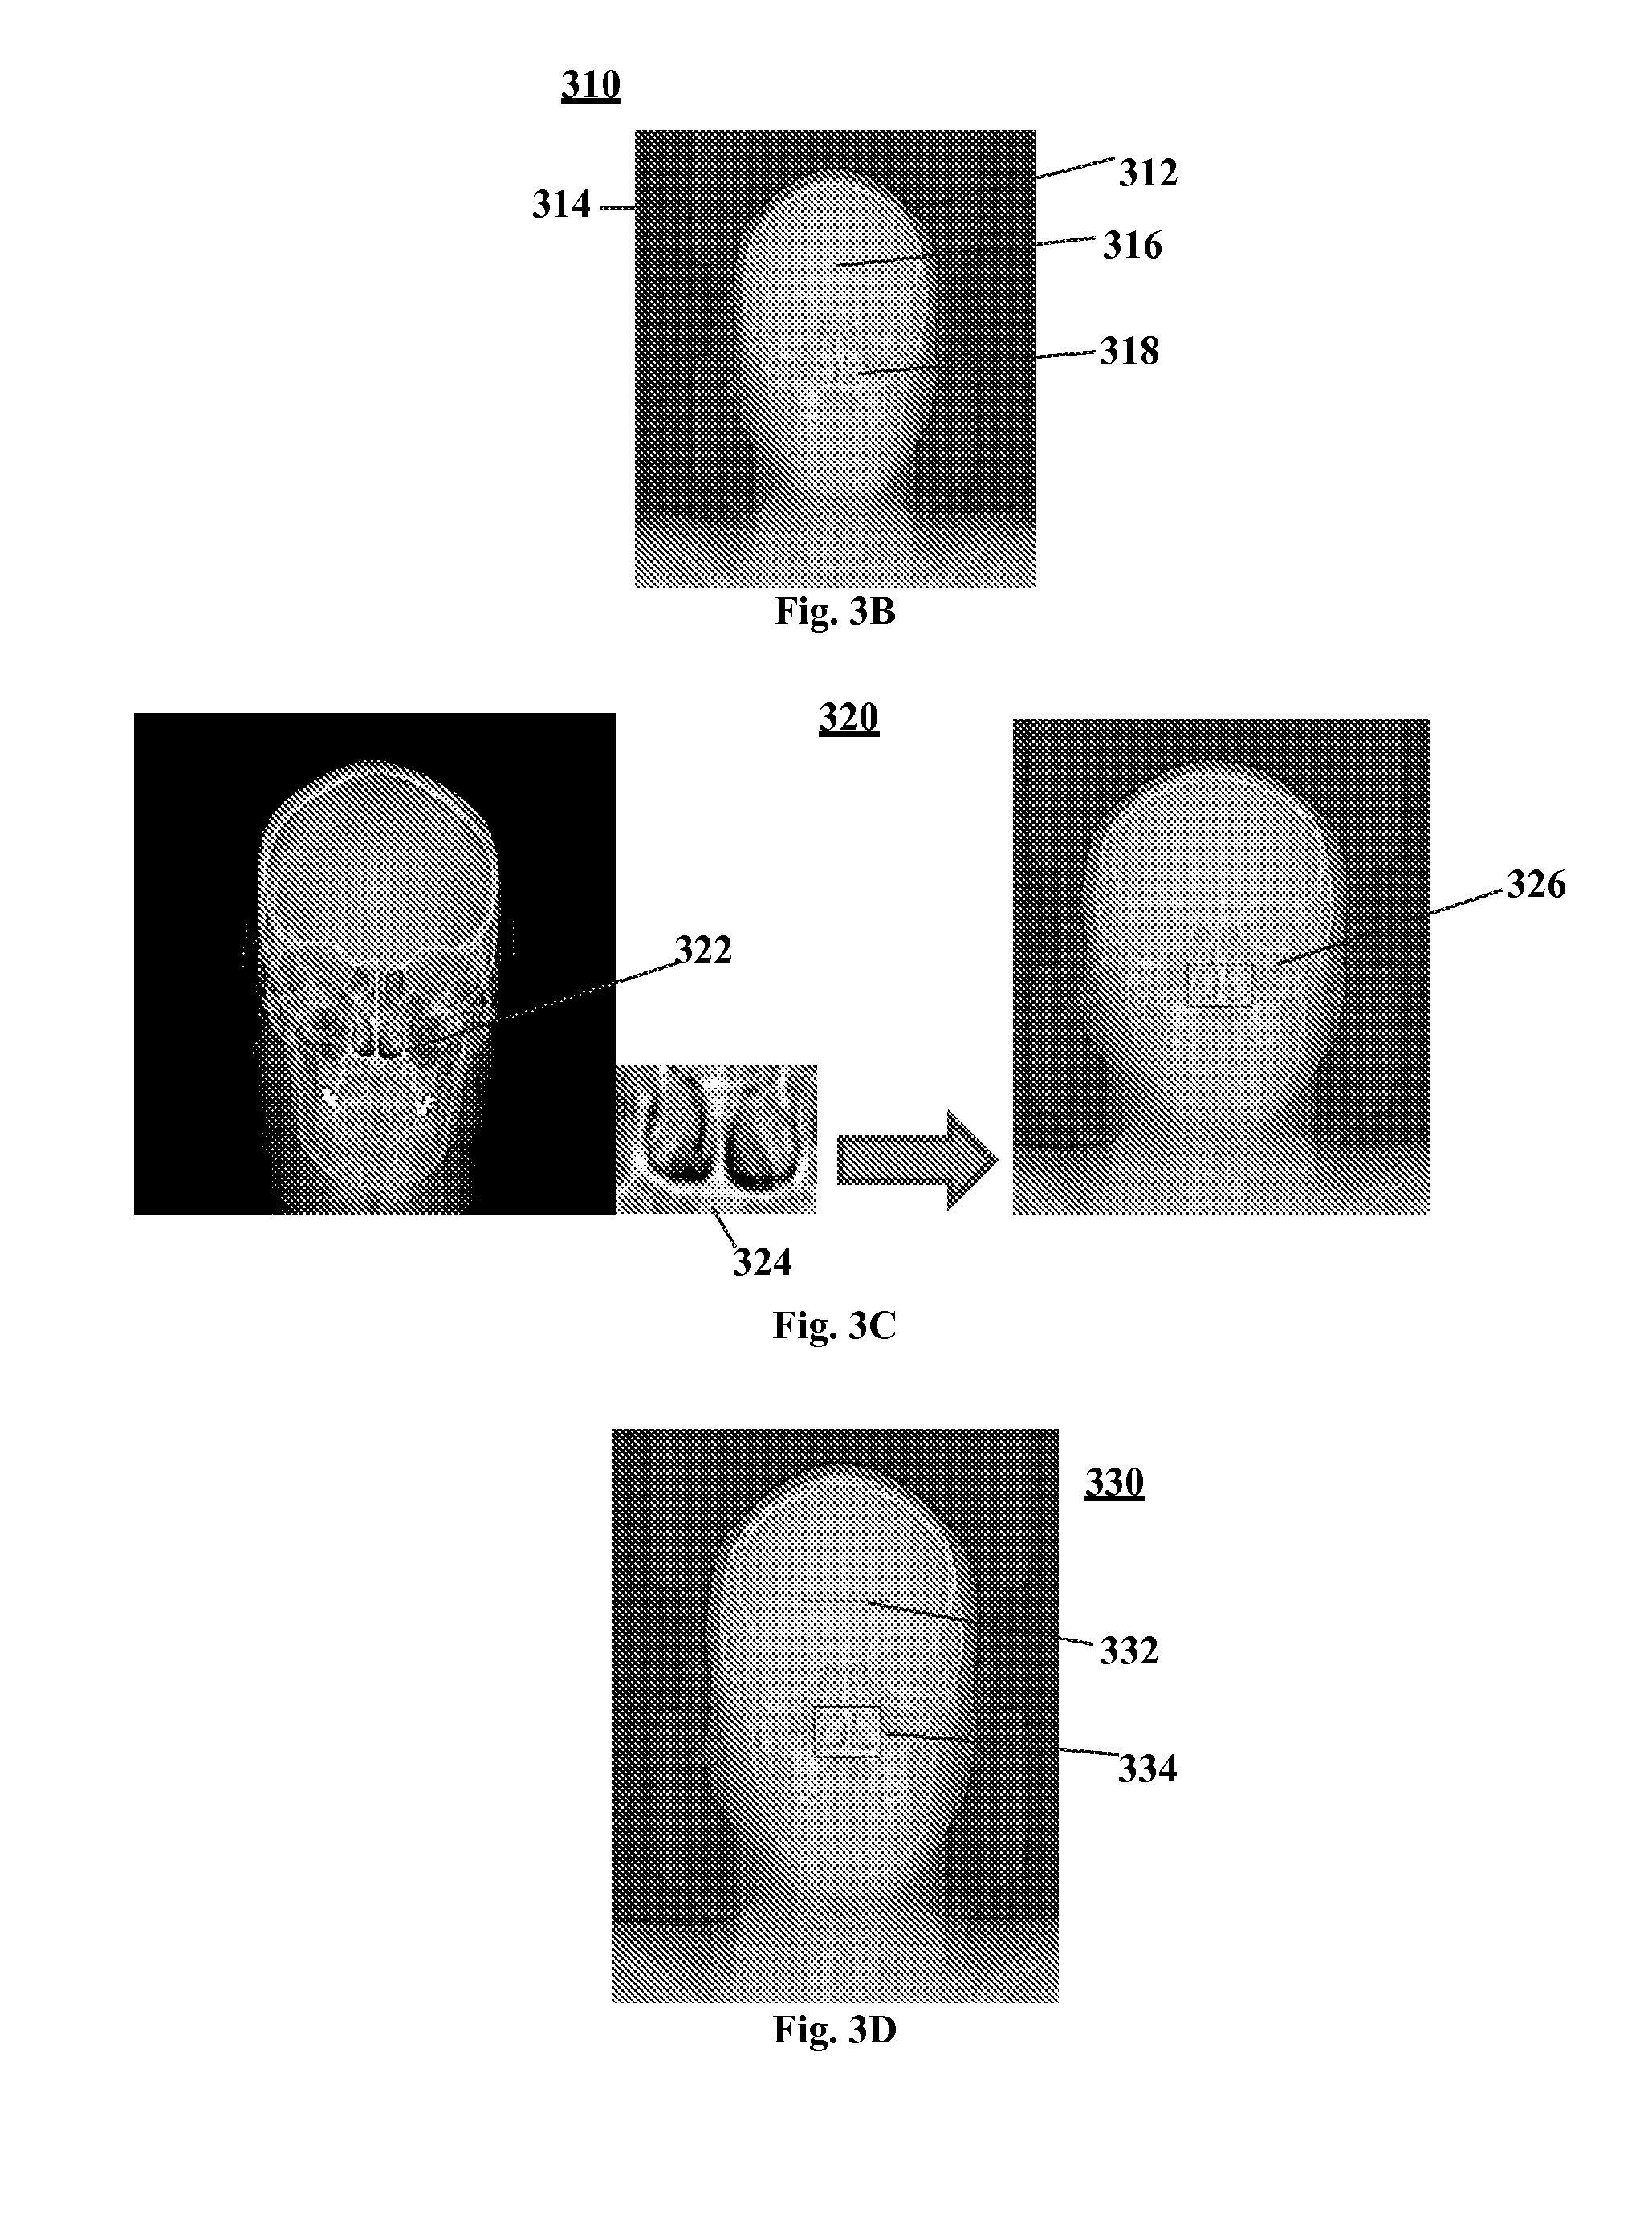 Automatic scanning and positioning apparatus for a scout image